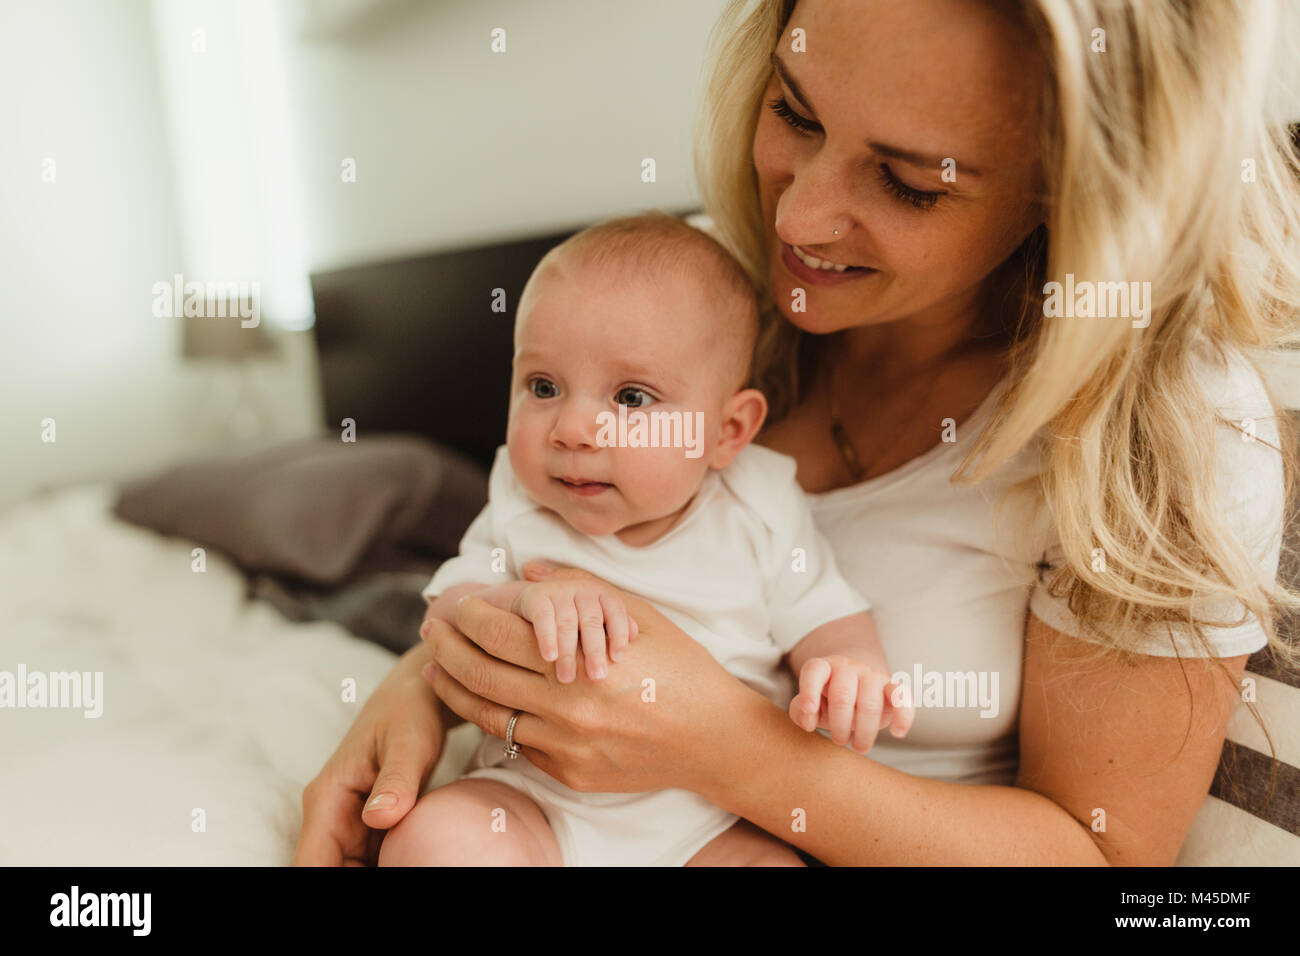 Baby girl sitting on mother's lap on bed Stock Photo